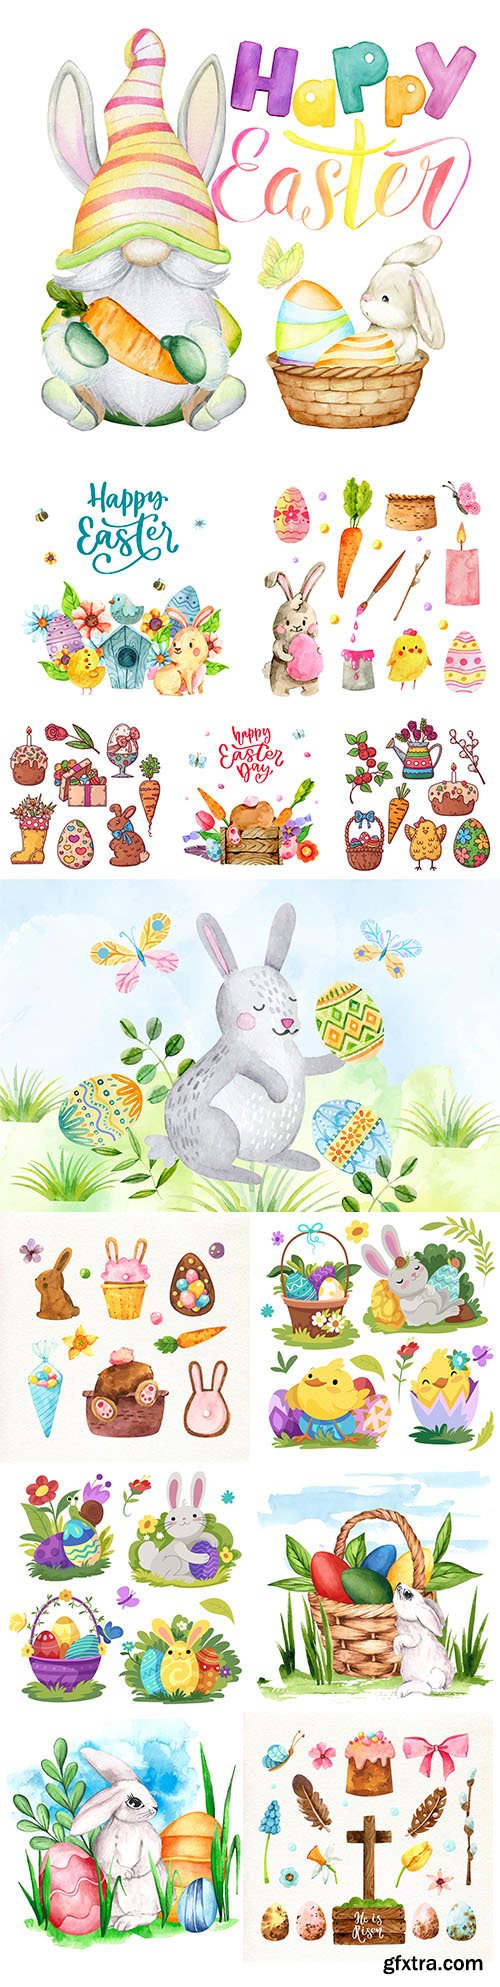 Happy Easter collection of watercolor illustrations and elements
